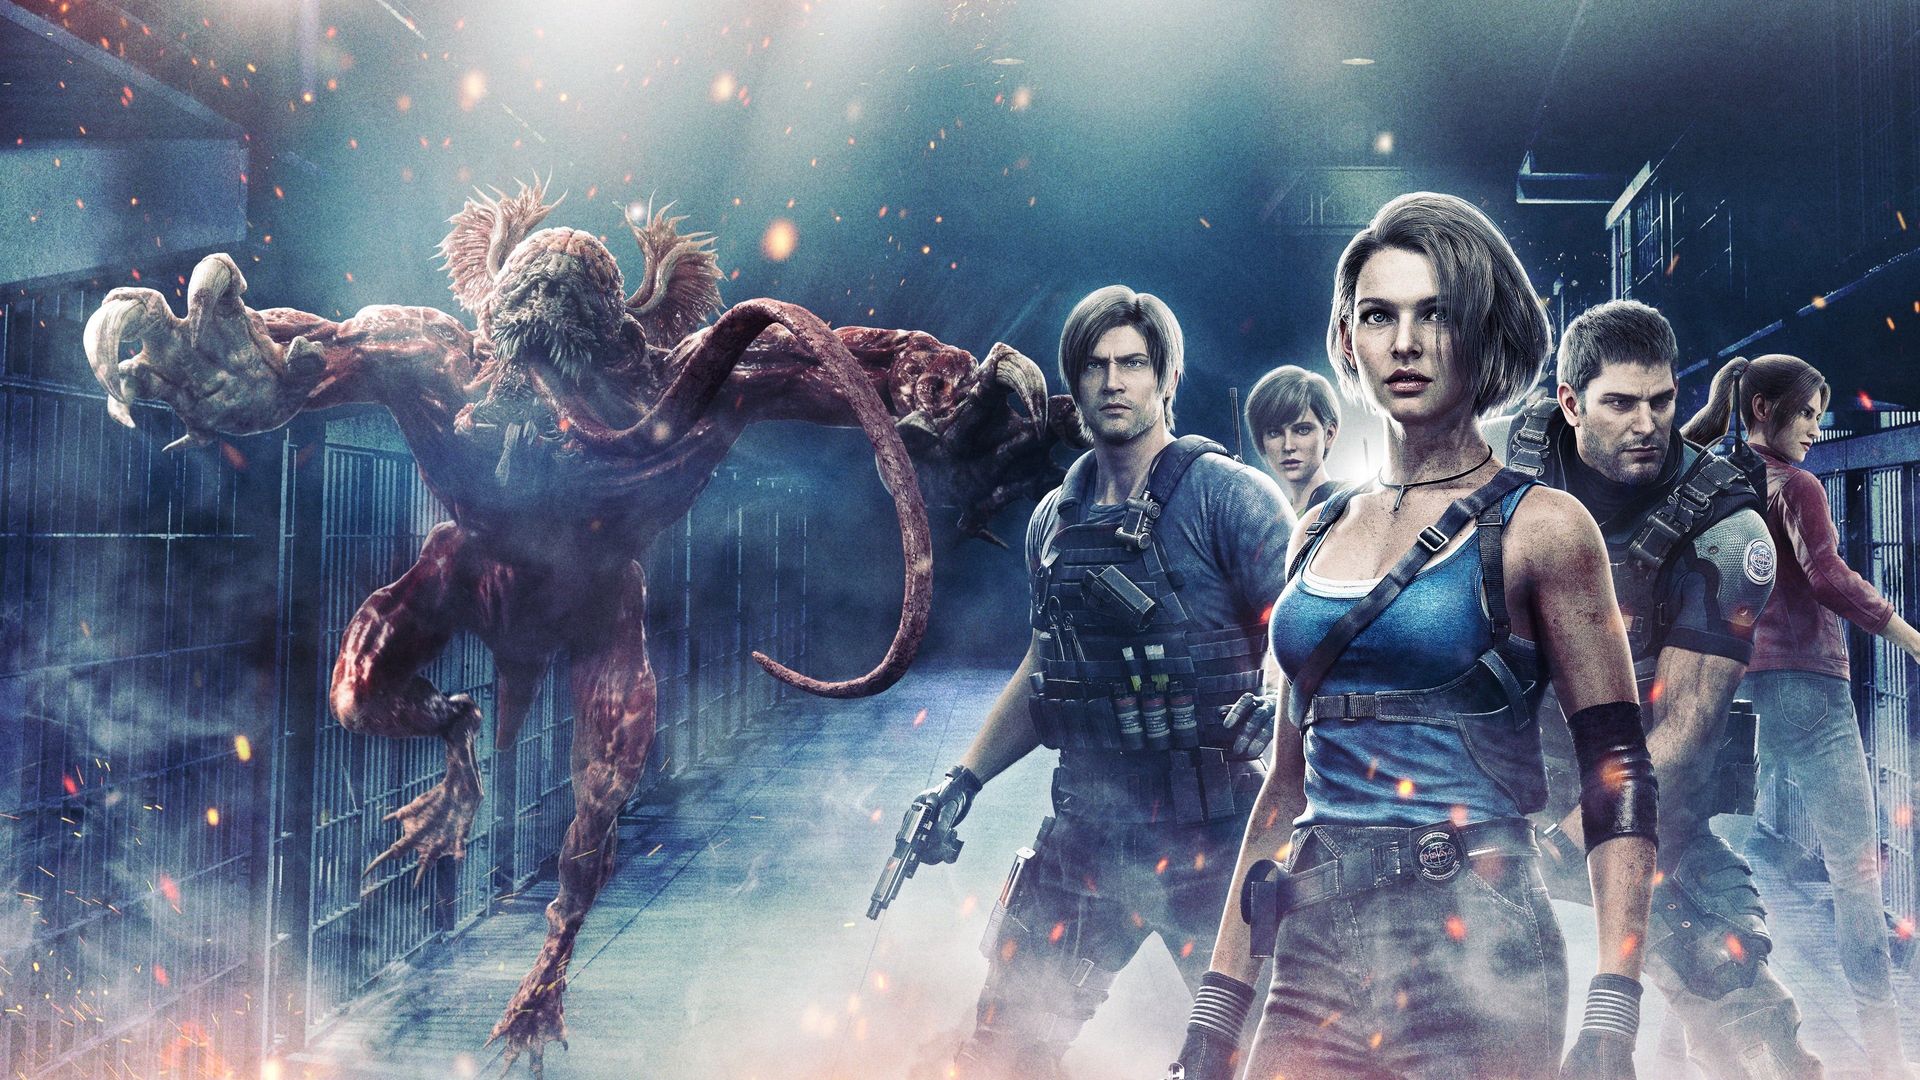 Resident Evil: Death Island trailer offers a look at new animated feature -  IMDb